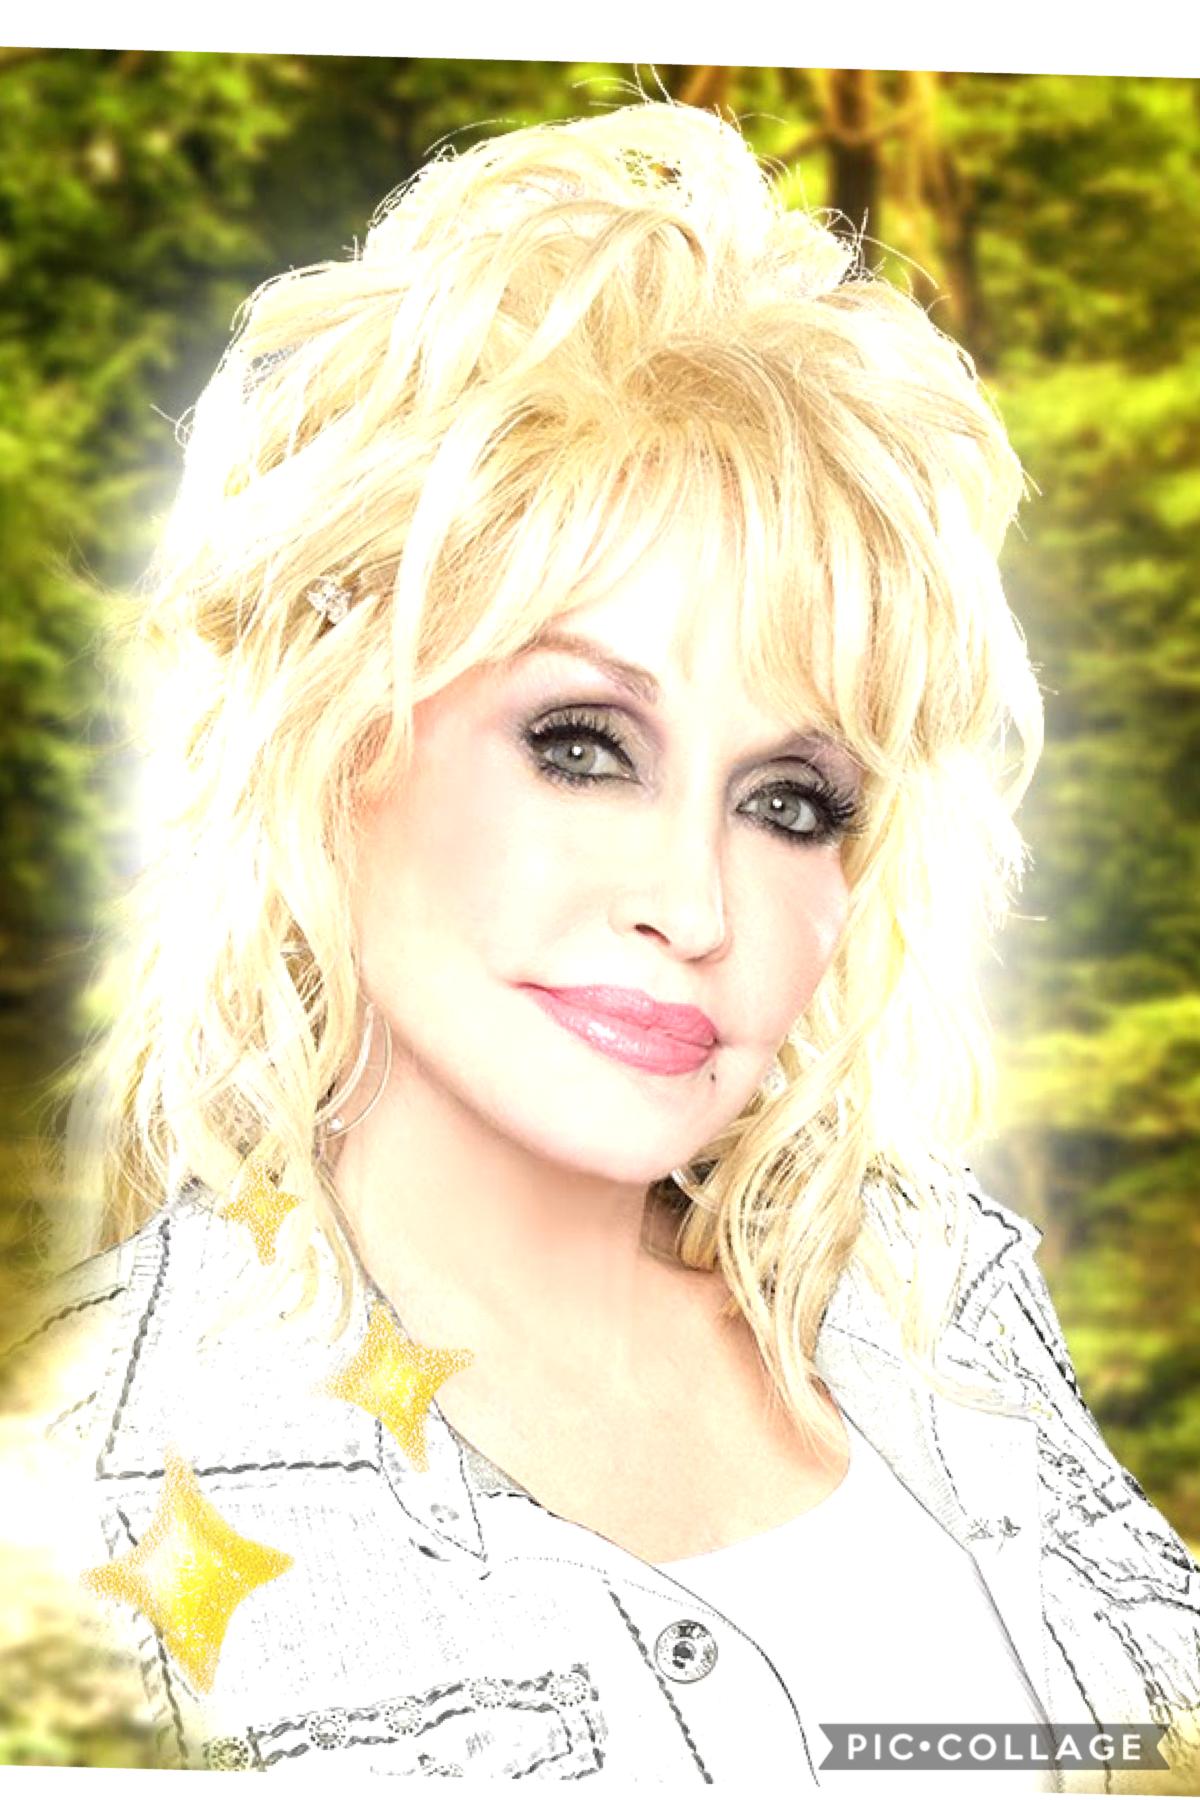 I did a collage of Dolly Parton because she’s pretty 